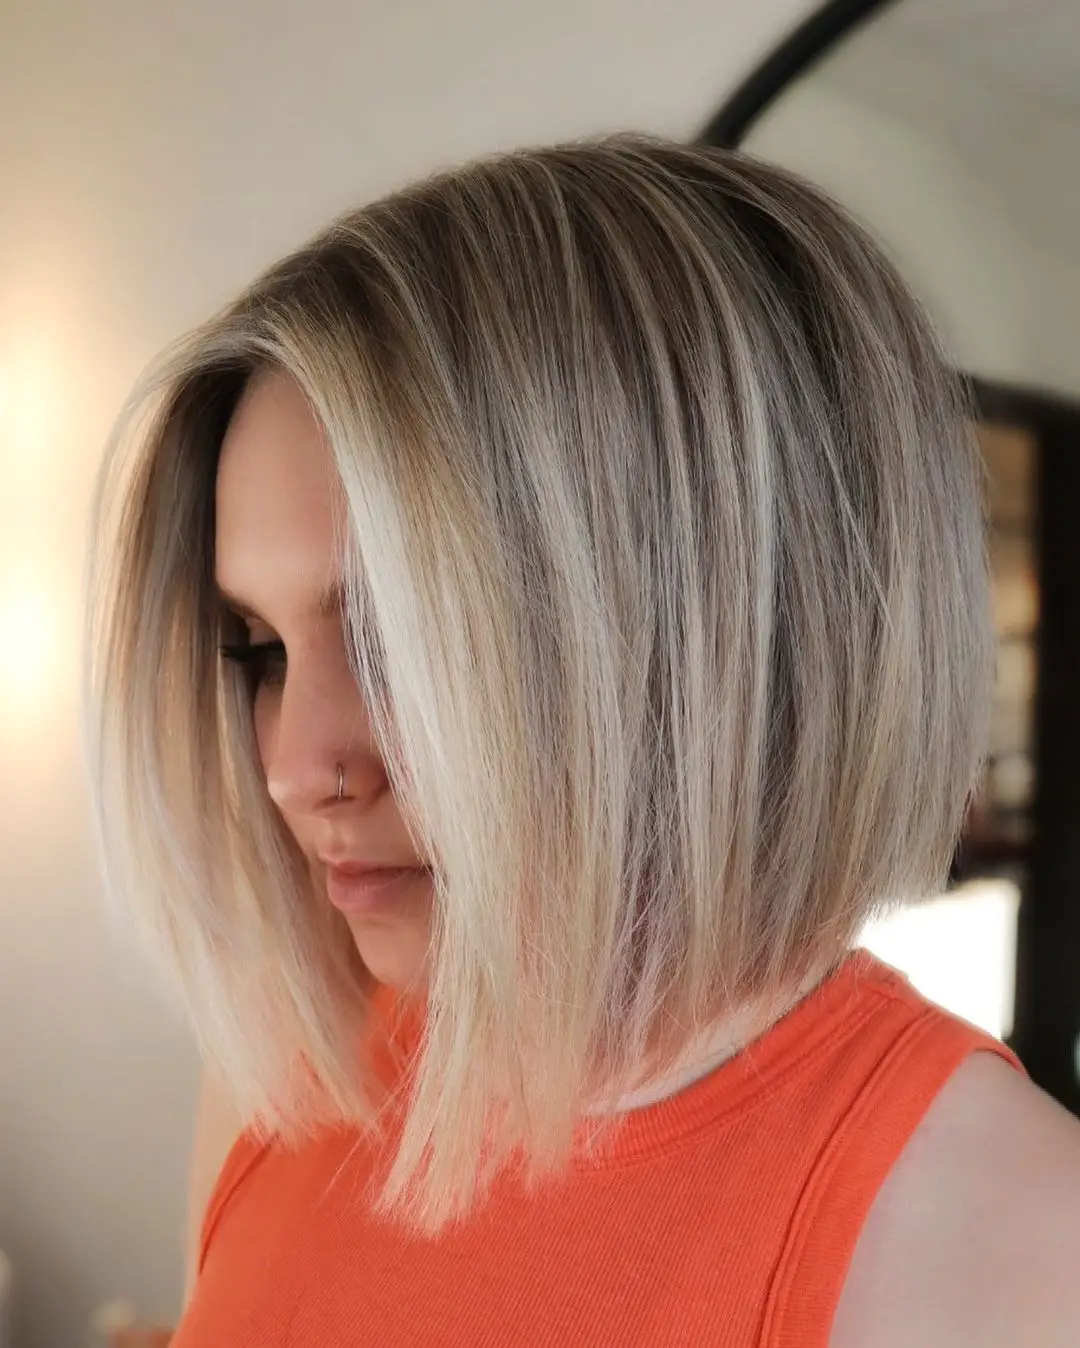 20-best-hairstyles-for-hispanic-women-with-blonde-hair Textured Angled Bob